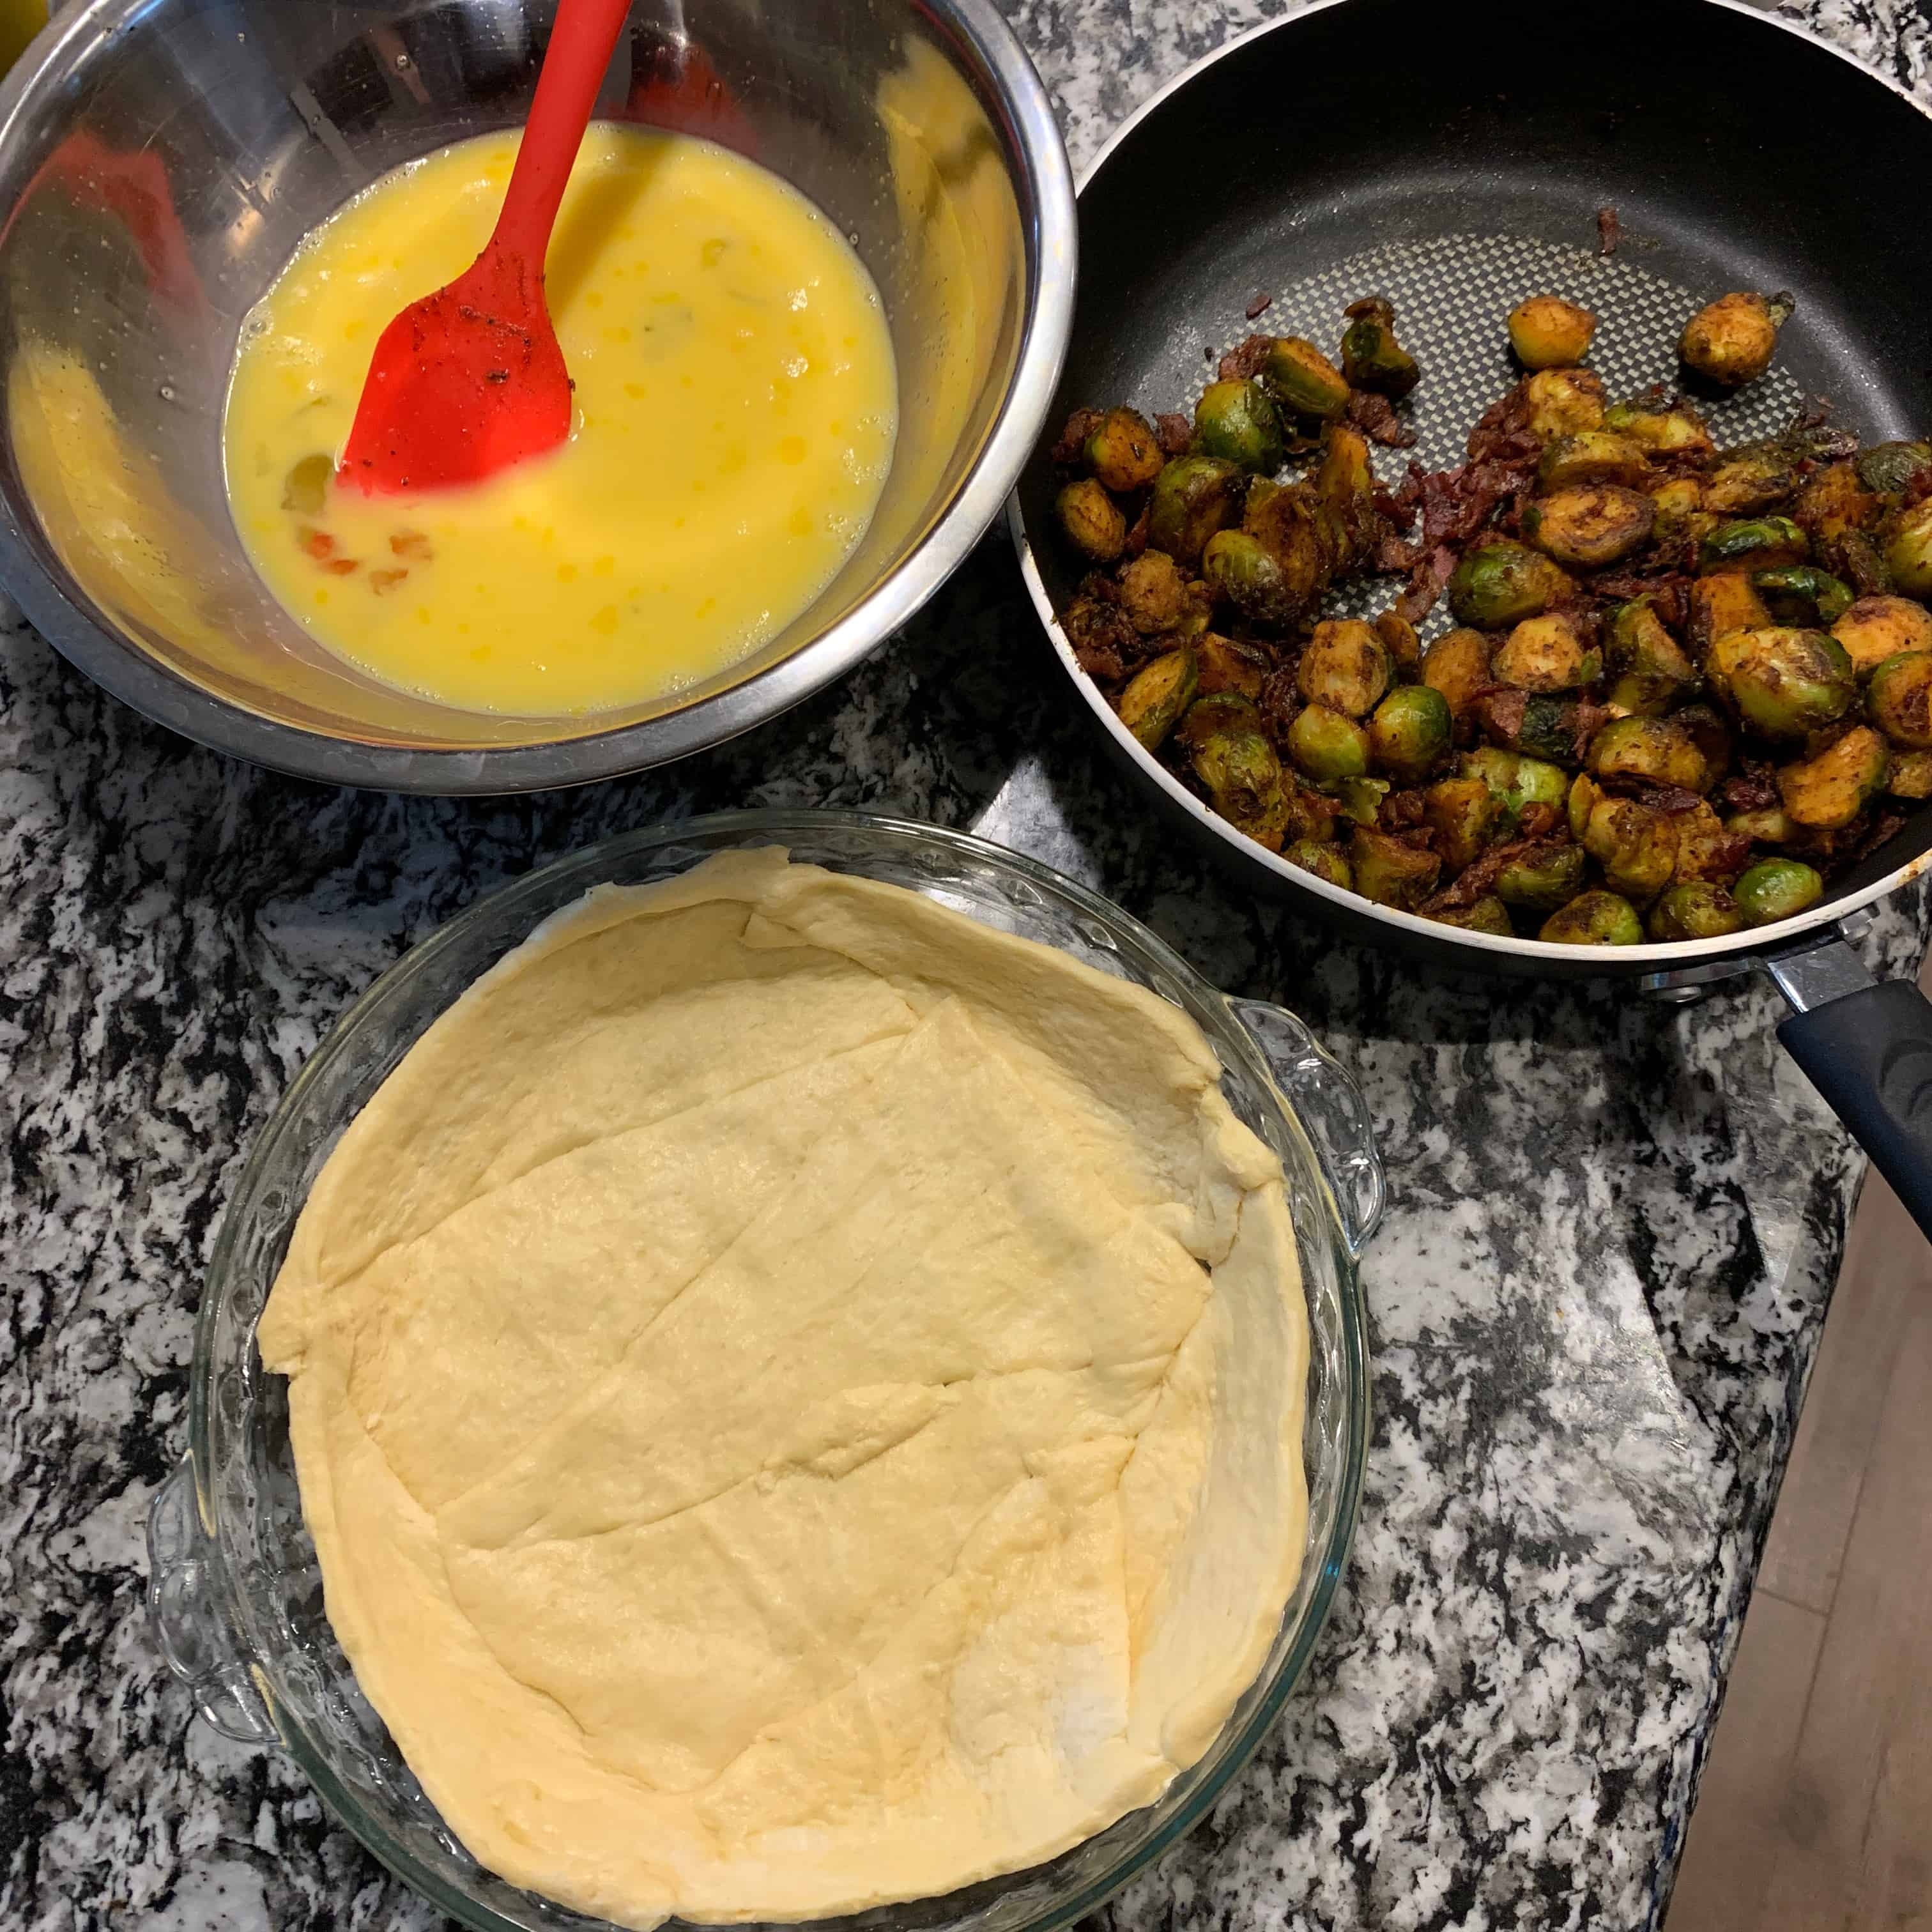 crescent rolls rolled flat in a pie dish, smoked brussels sprouts in a pan with bacon, and whisked eggs in a bowl before assembling the breakfast pie